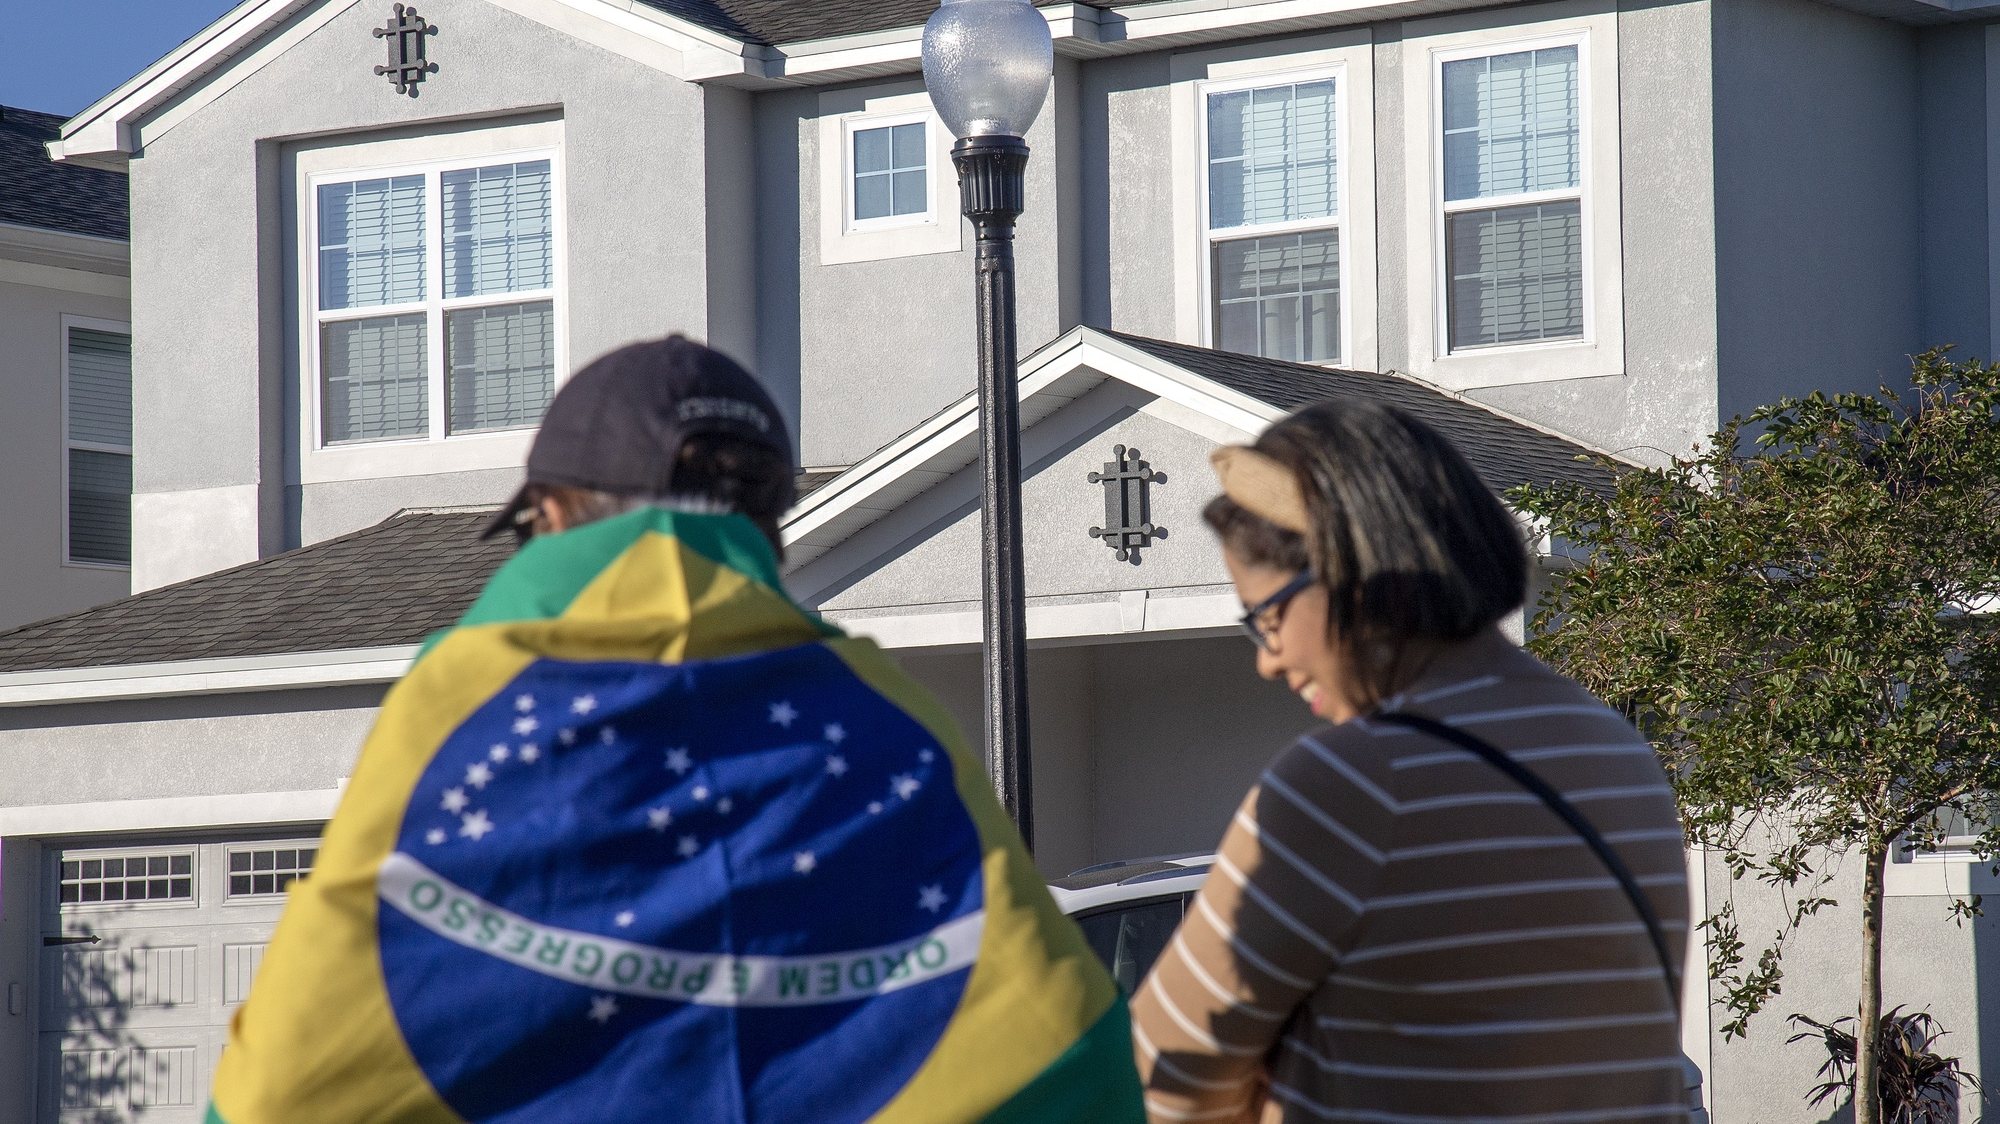 epa10401534 People stand in front of the house at the Encore Resort Homes, where former Brazil president Jair Bolsonaro is staying, in Reunion, Florida, USA, 12 January 2023. US Lawmakers called US President Joe Biden to extradite Bolsonaro back to his country from Florida. Bolsonaro has been staying in Central Florida, near Orlando, as his supporters protest in Brazil.  EPA/CRISTOBAL HERRERA-ULASHKEVICH